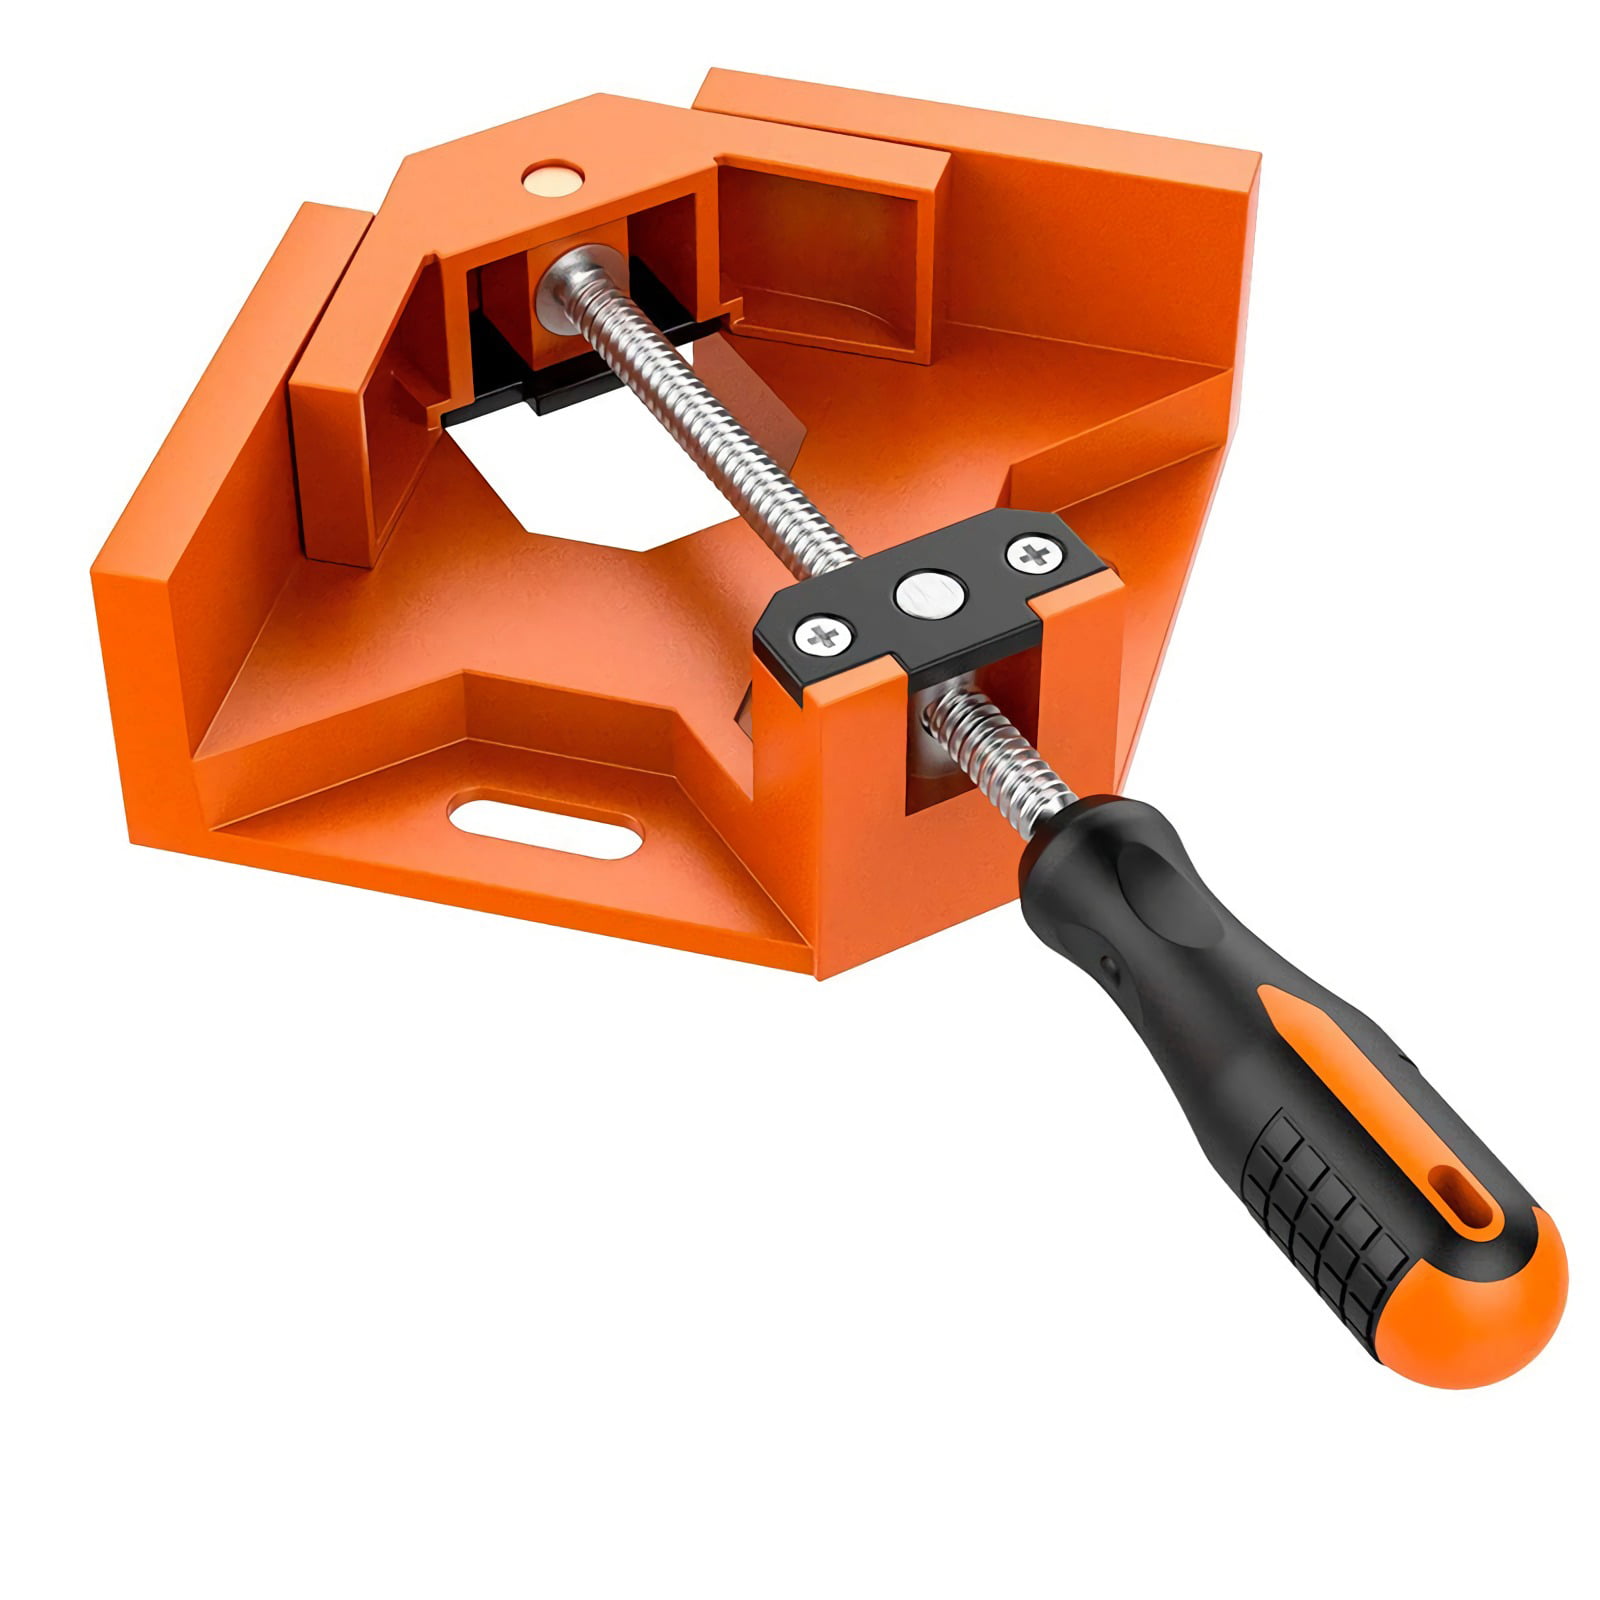 90 Degree Angle Clamp Woodworking Frame Corner Clamp Holder Tool Double Handle 